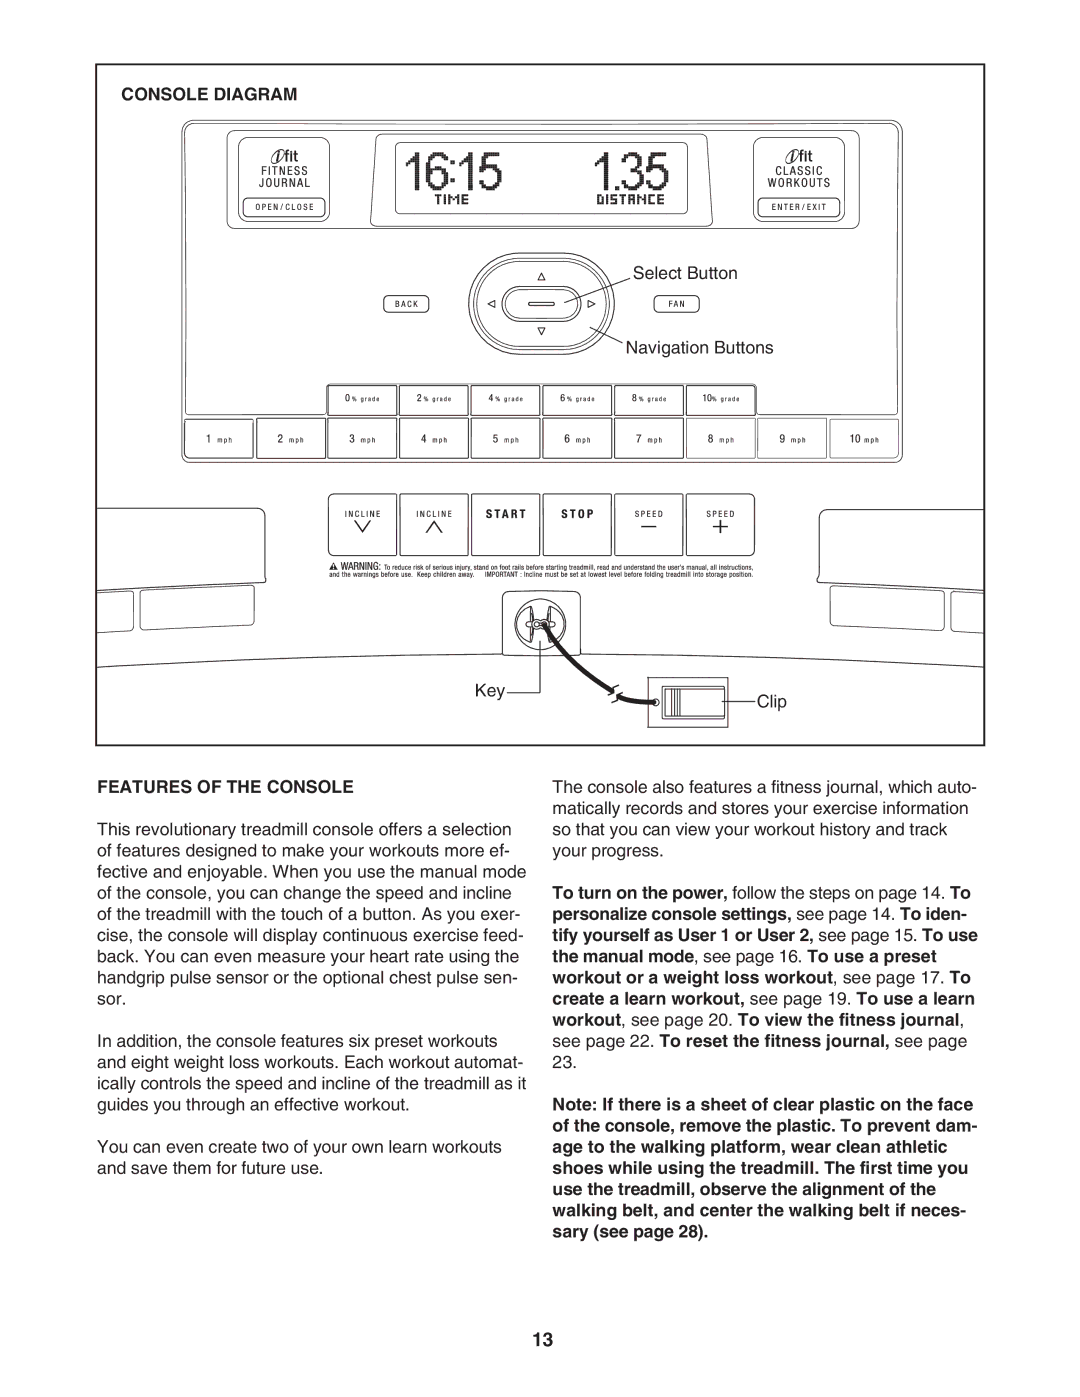 NordicTrack NTL06907.0 user manual Console Diagram, Features of the Console 